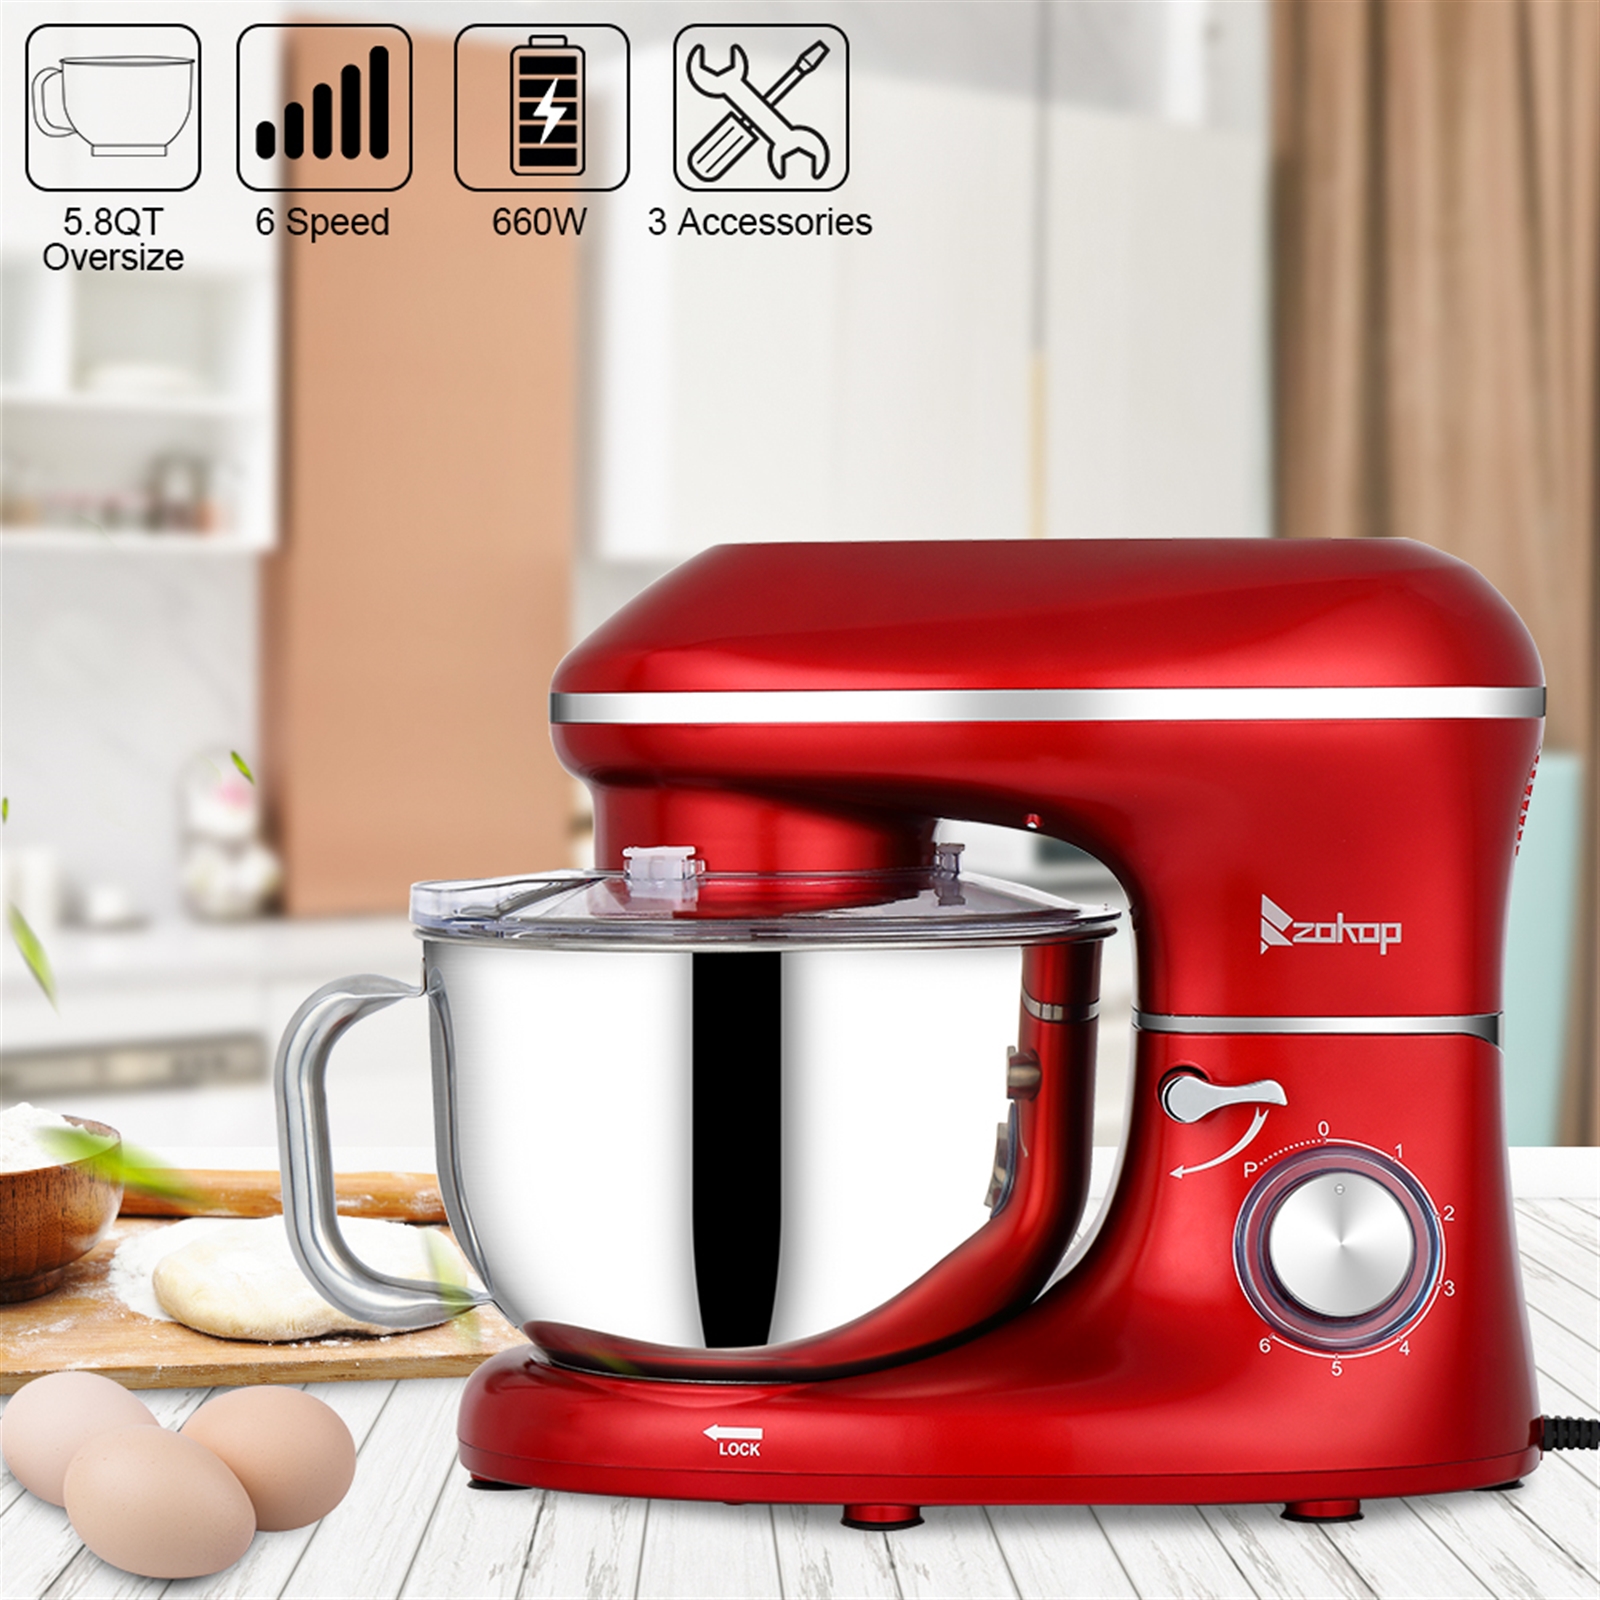 Stand Mixer, 650W 6 Speed 5.8 Quart Tilt-Head Kitchen Electric Food Mixer with Beater, Dough Hook and Wire Whip, Red - image 2 of 7